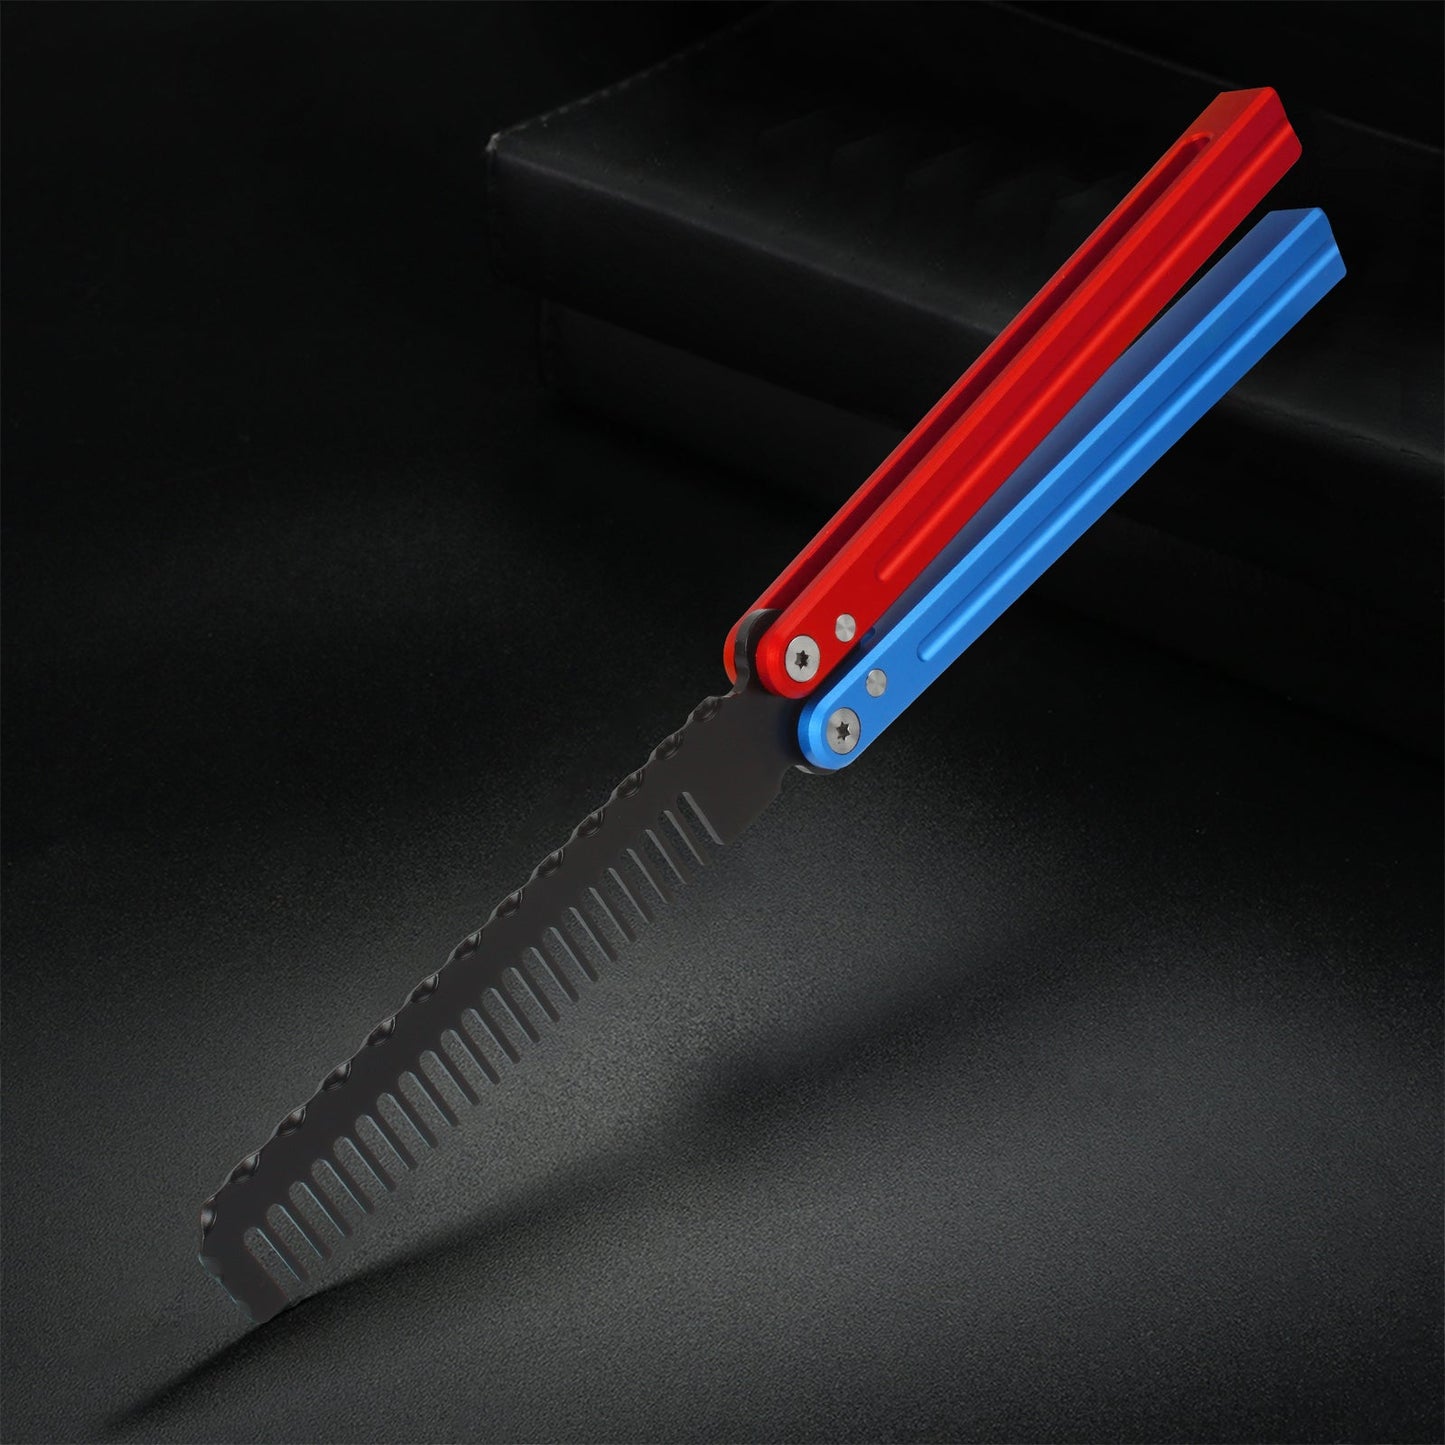 Andux 7075 Aluminum Balisong Butterfly Knife Comb CNC Effective Bushing System Training Tool Lock Free (Red+Blue) CNC-S01